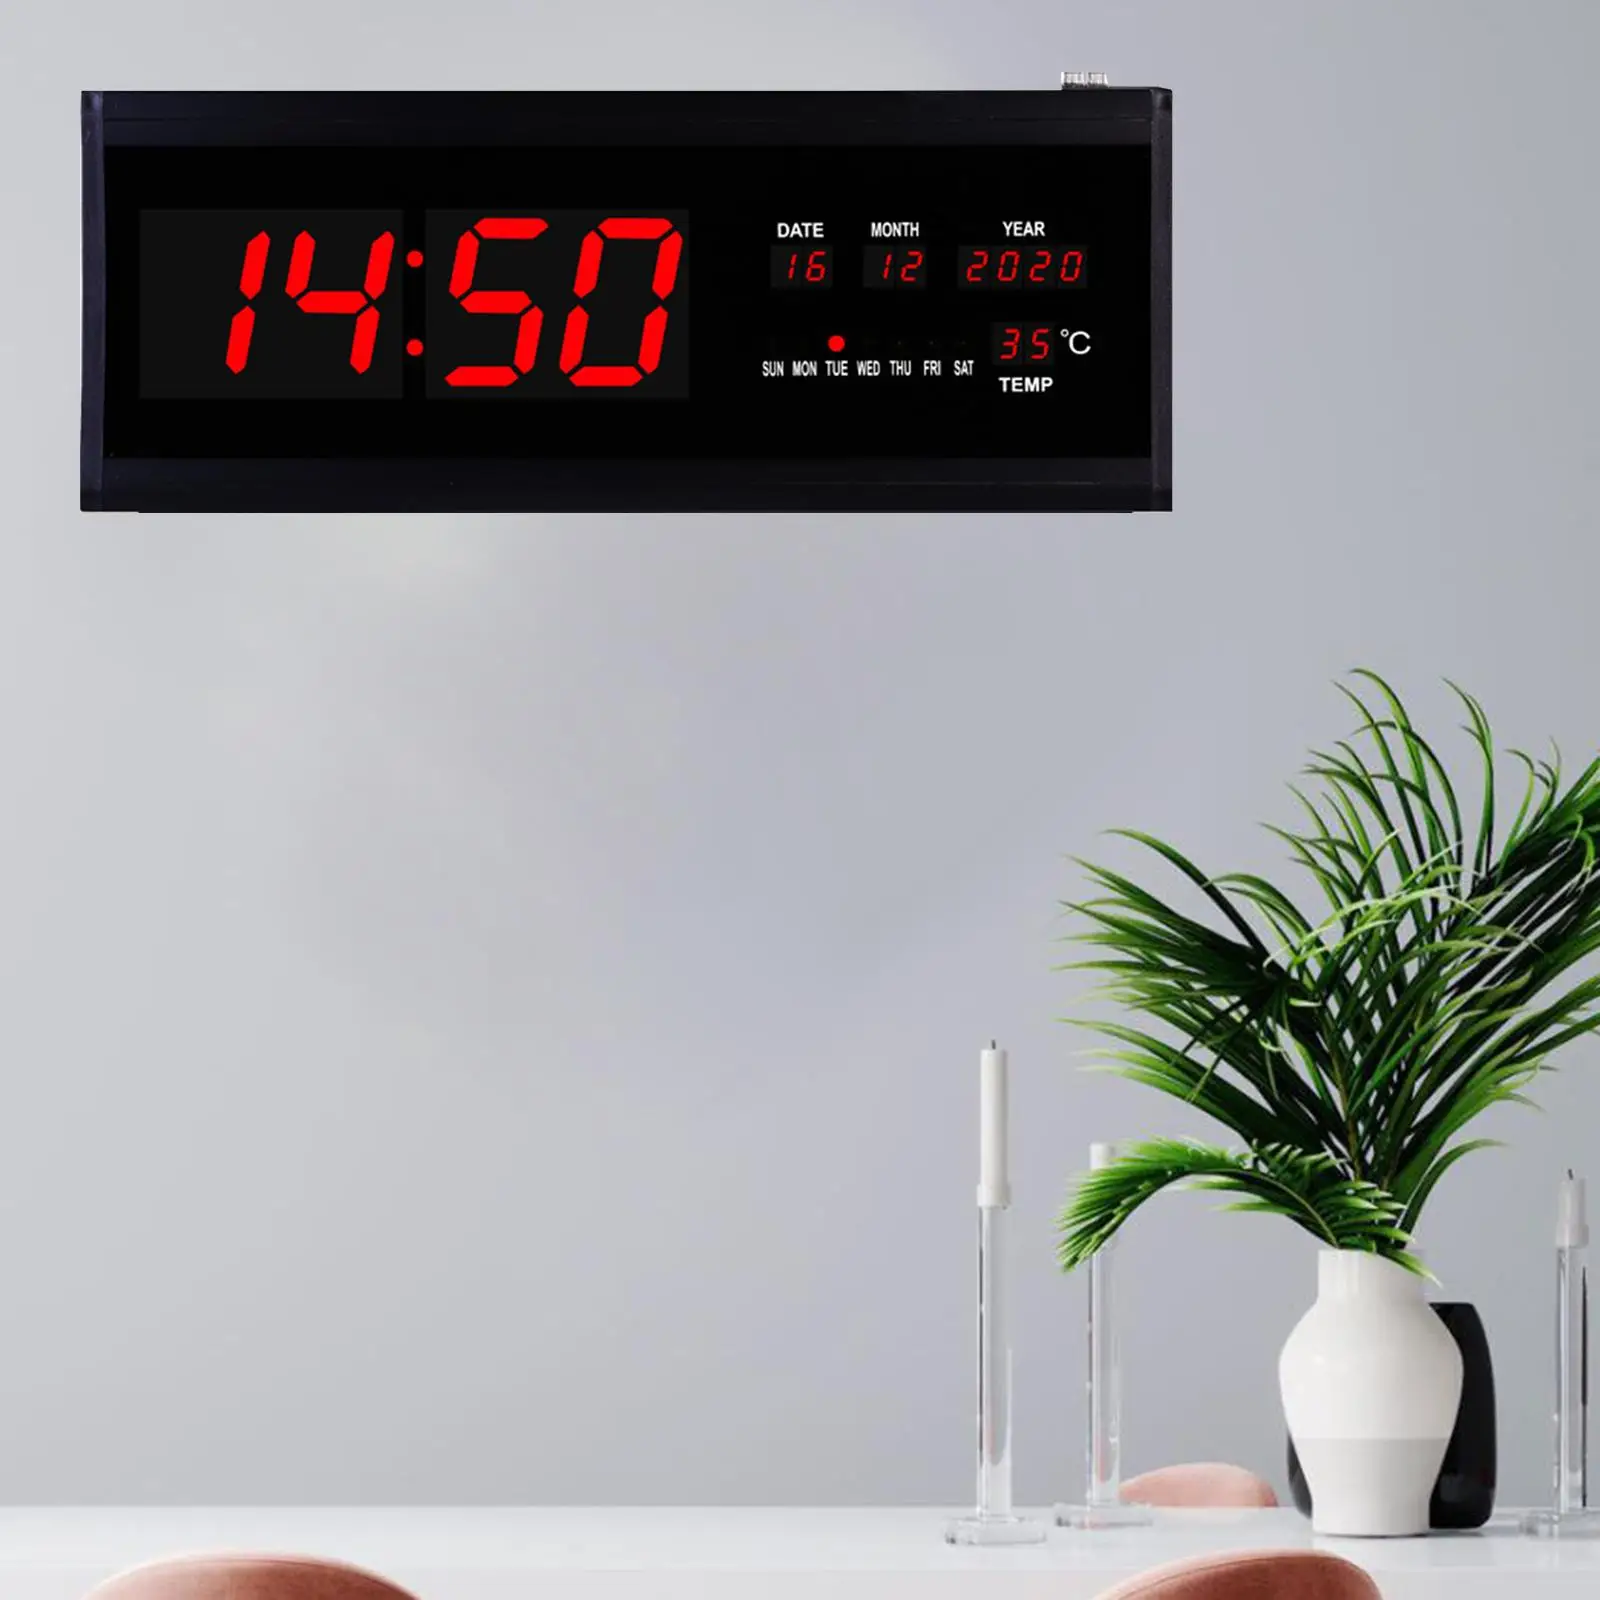 Digital Wall Clock Oversized Desk Clock Month Week Date Year LED Wall Mounted USB for Office Bedroom Study Room Living Room Home